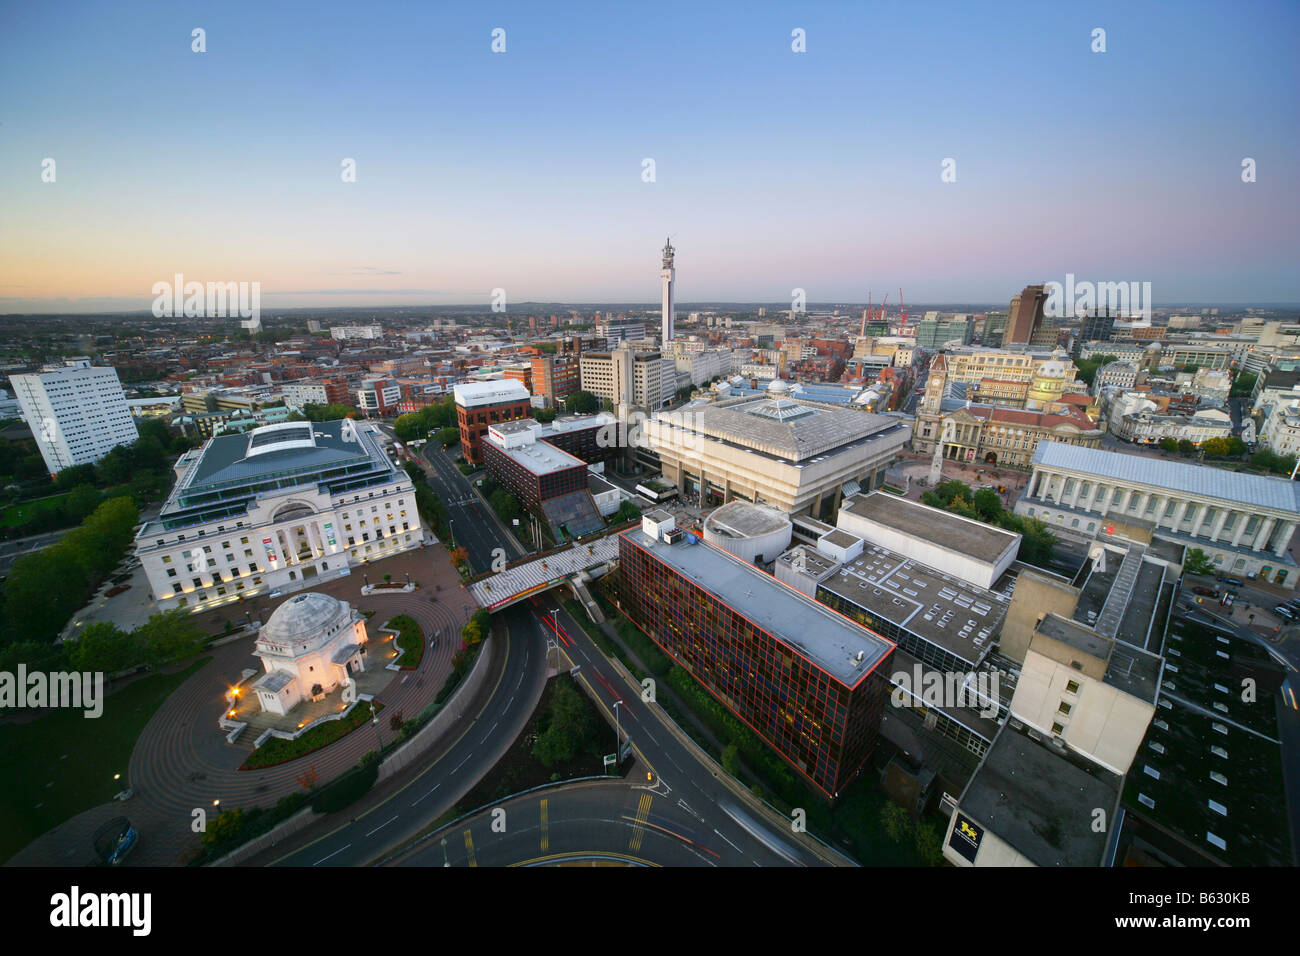 Paradise Circus and Baskerville House in Birmingham City Centre Stock Photo